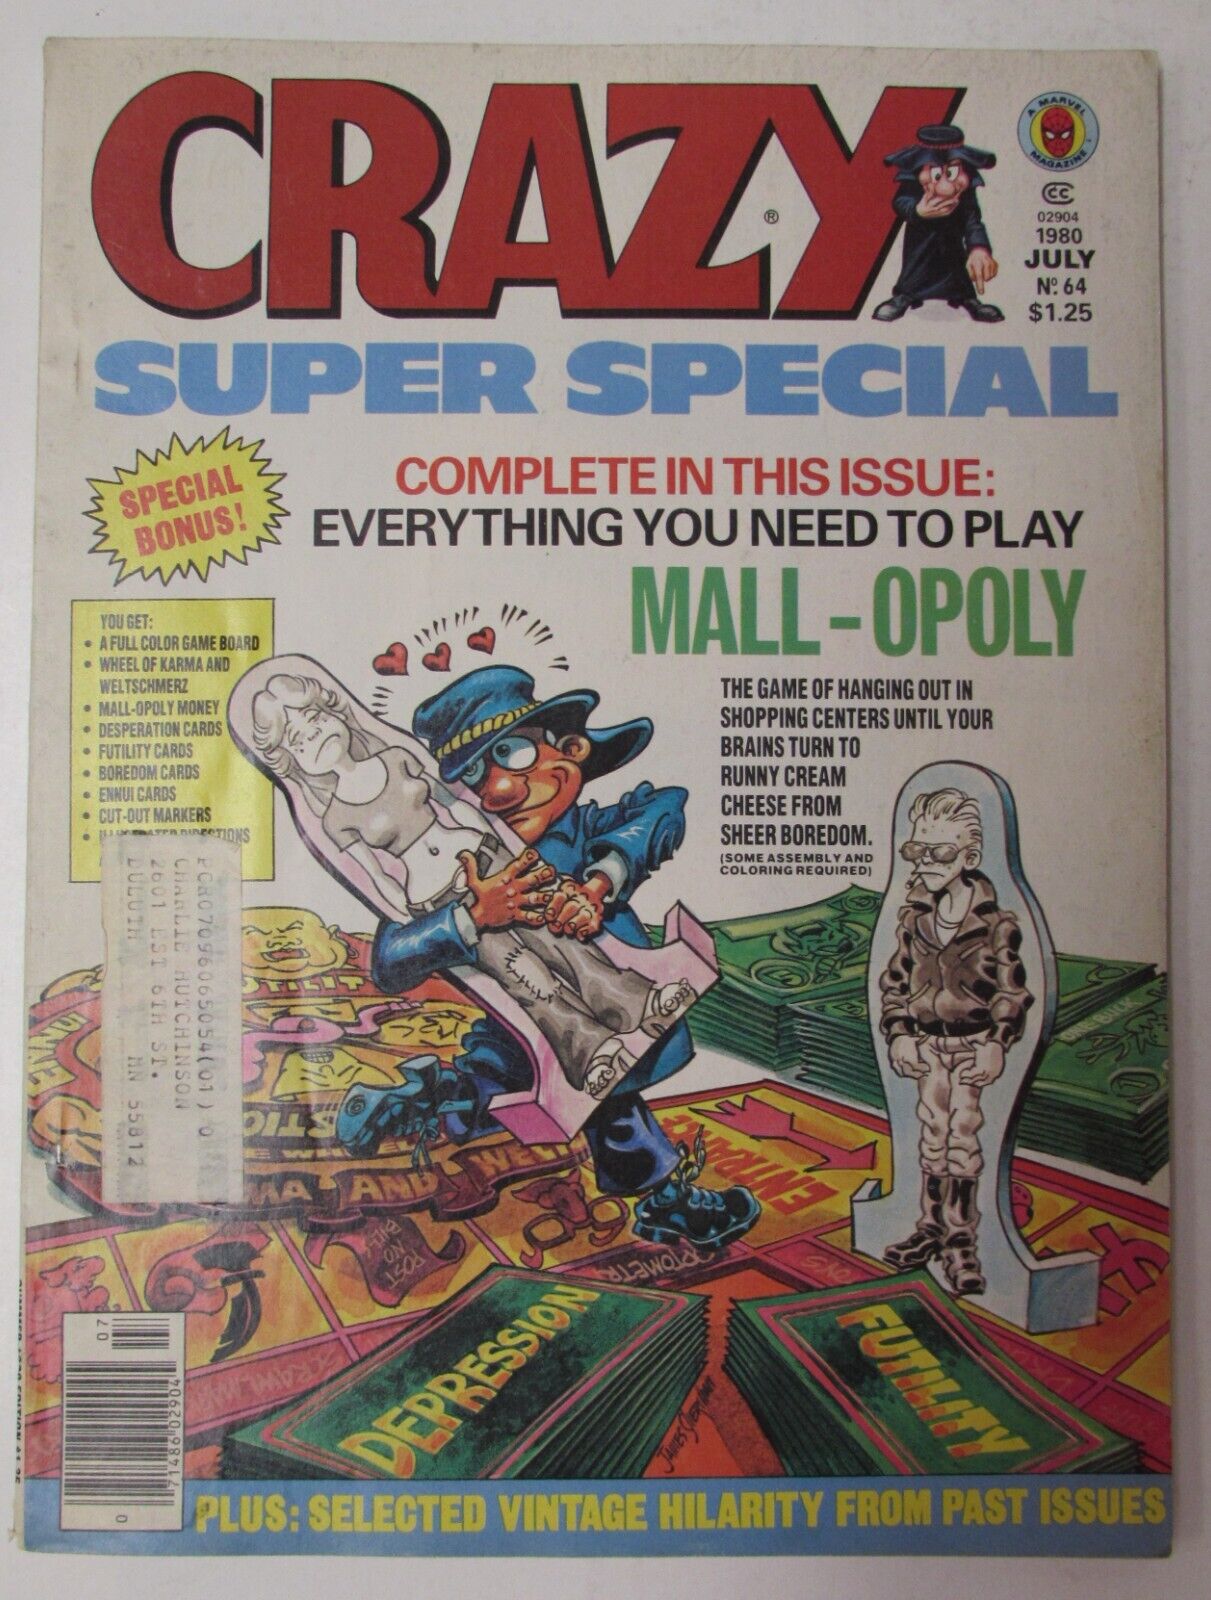 July 1980 #64 - Marvel Crazy Magazine - Super Special Mall-Opoly Issue